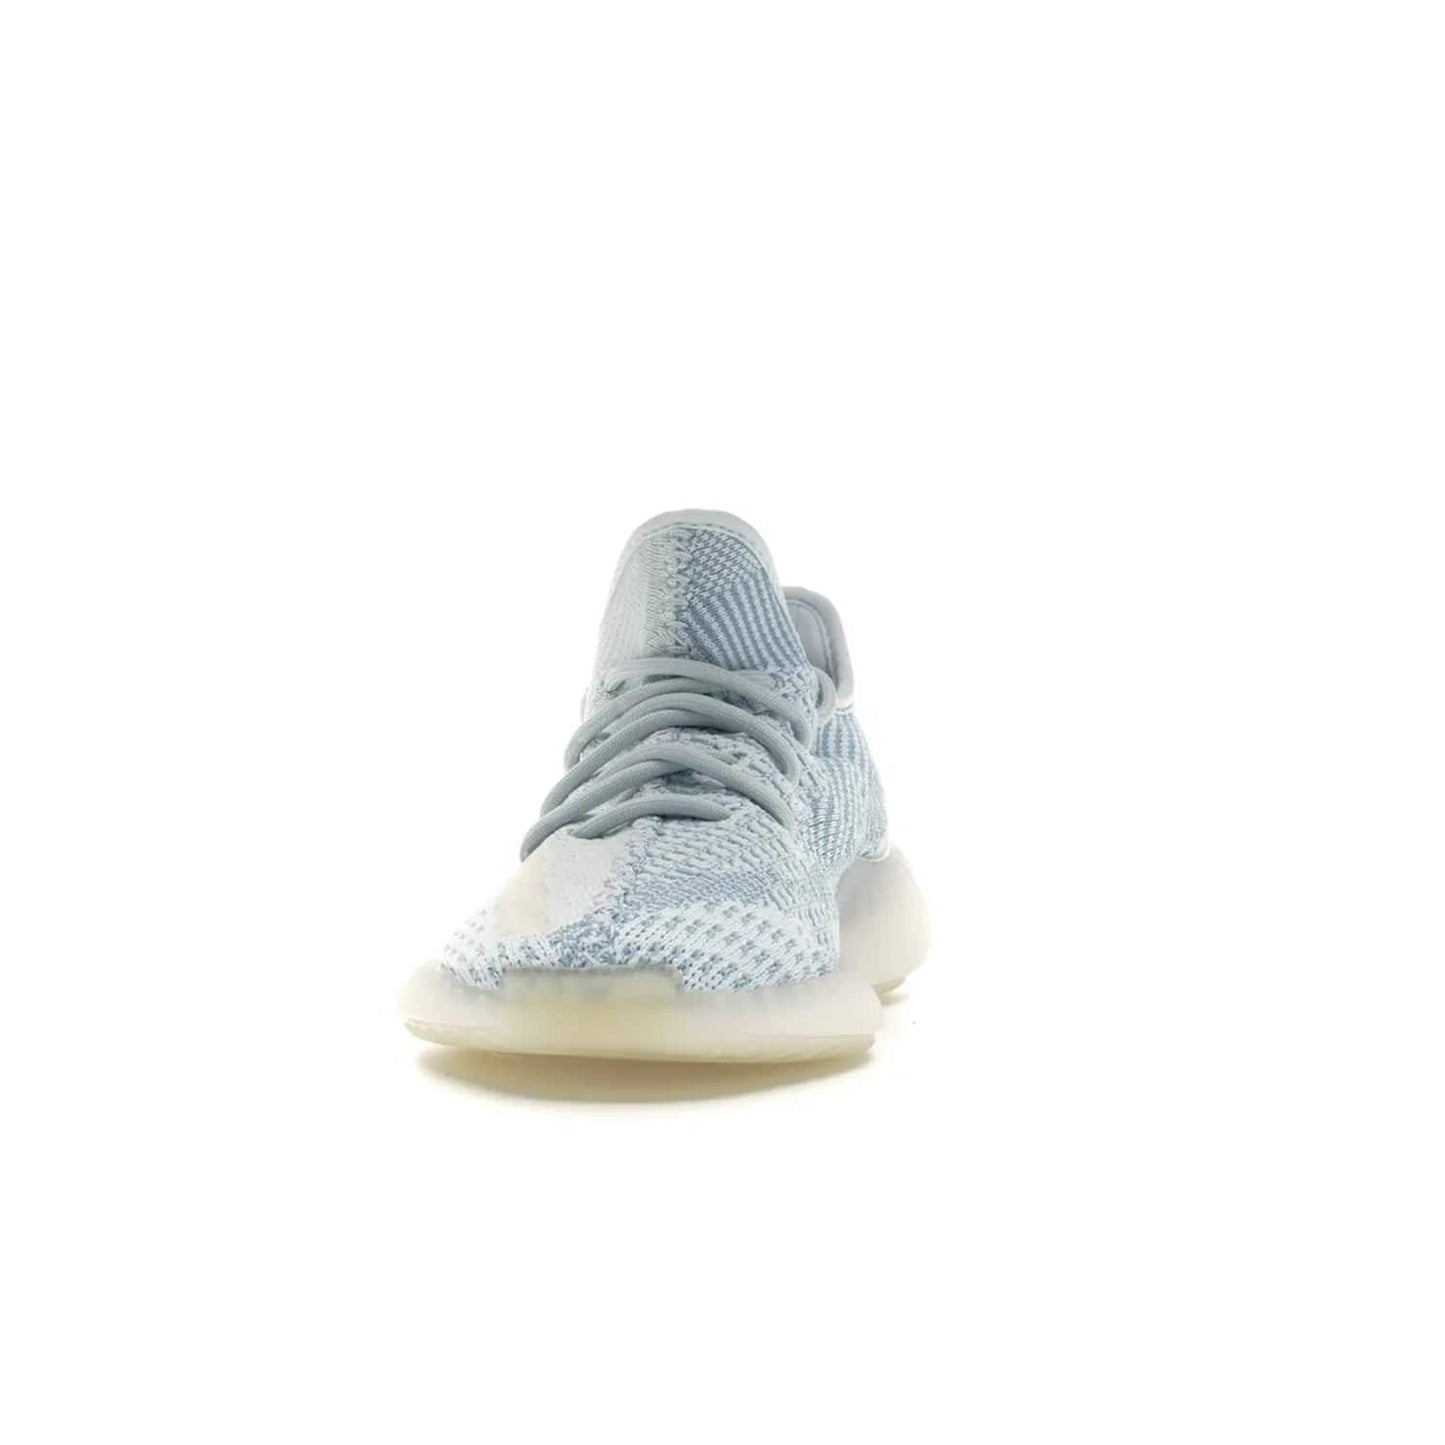 adidas Yeezy Boost 350 V2 Cloud White (Non-Reflective) - Image 11 - Only at www.BallersClubKickz.com - Uniquely designed adidas Yeezy Boost 350 V2 Cloud White (Non-Reflective) with a Primeknit upper in shades of cream and blue with a contrasting hard sole. A fashion-forward sneaker with a transparent strip and blue-and-white patterns.